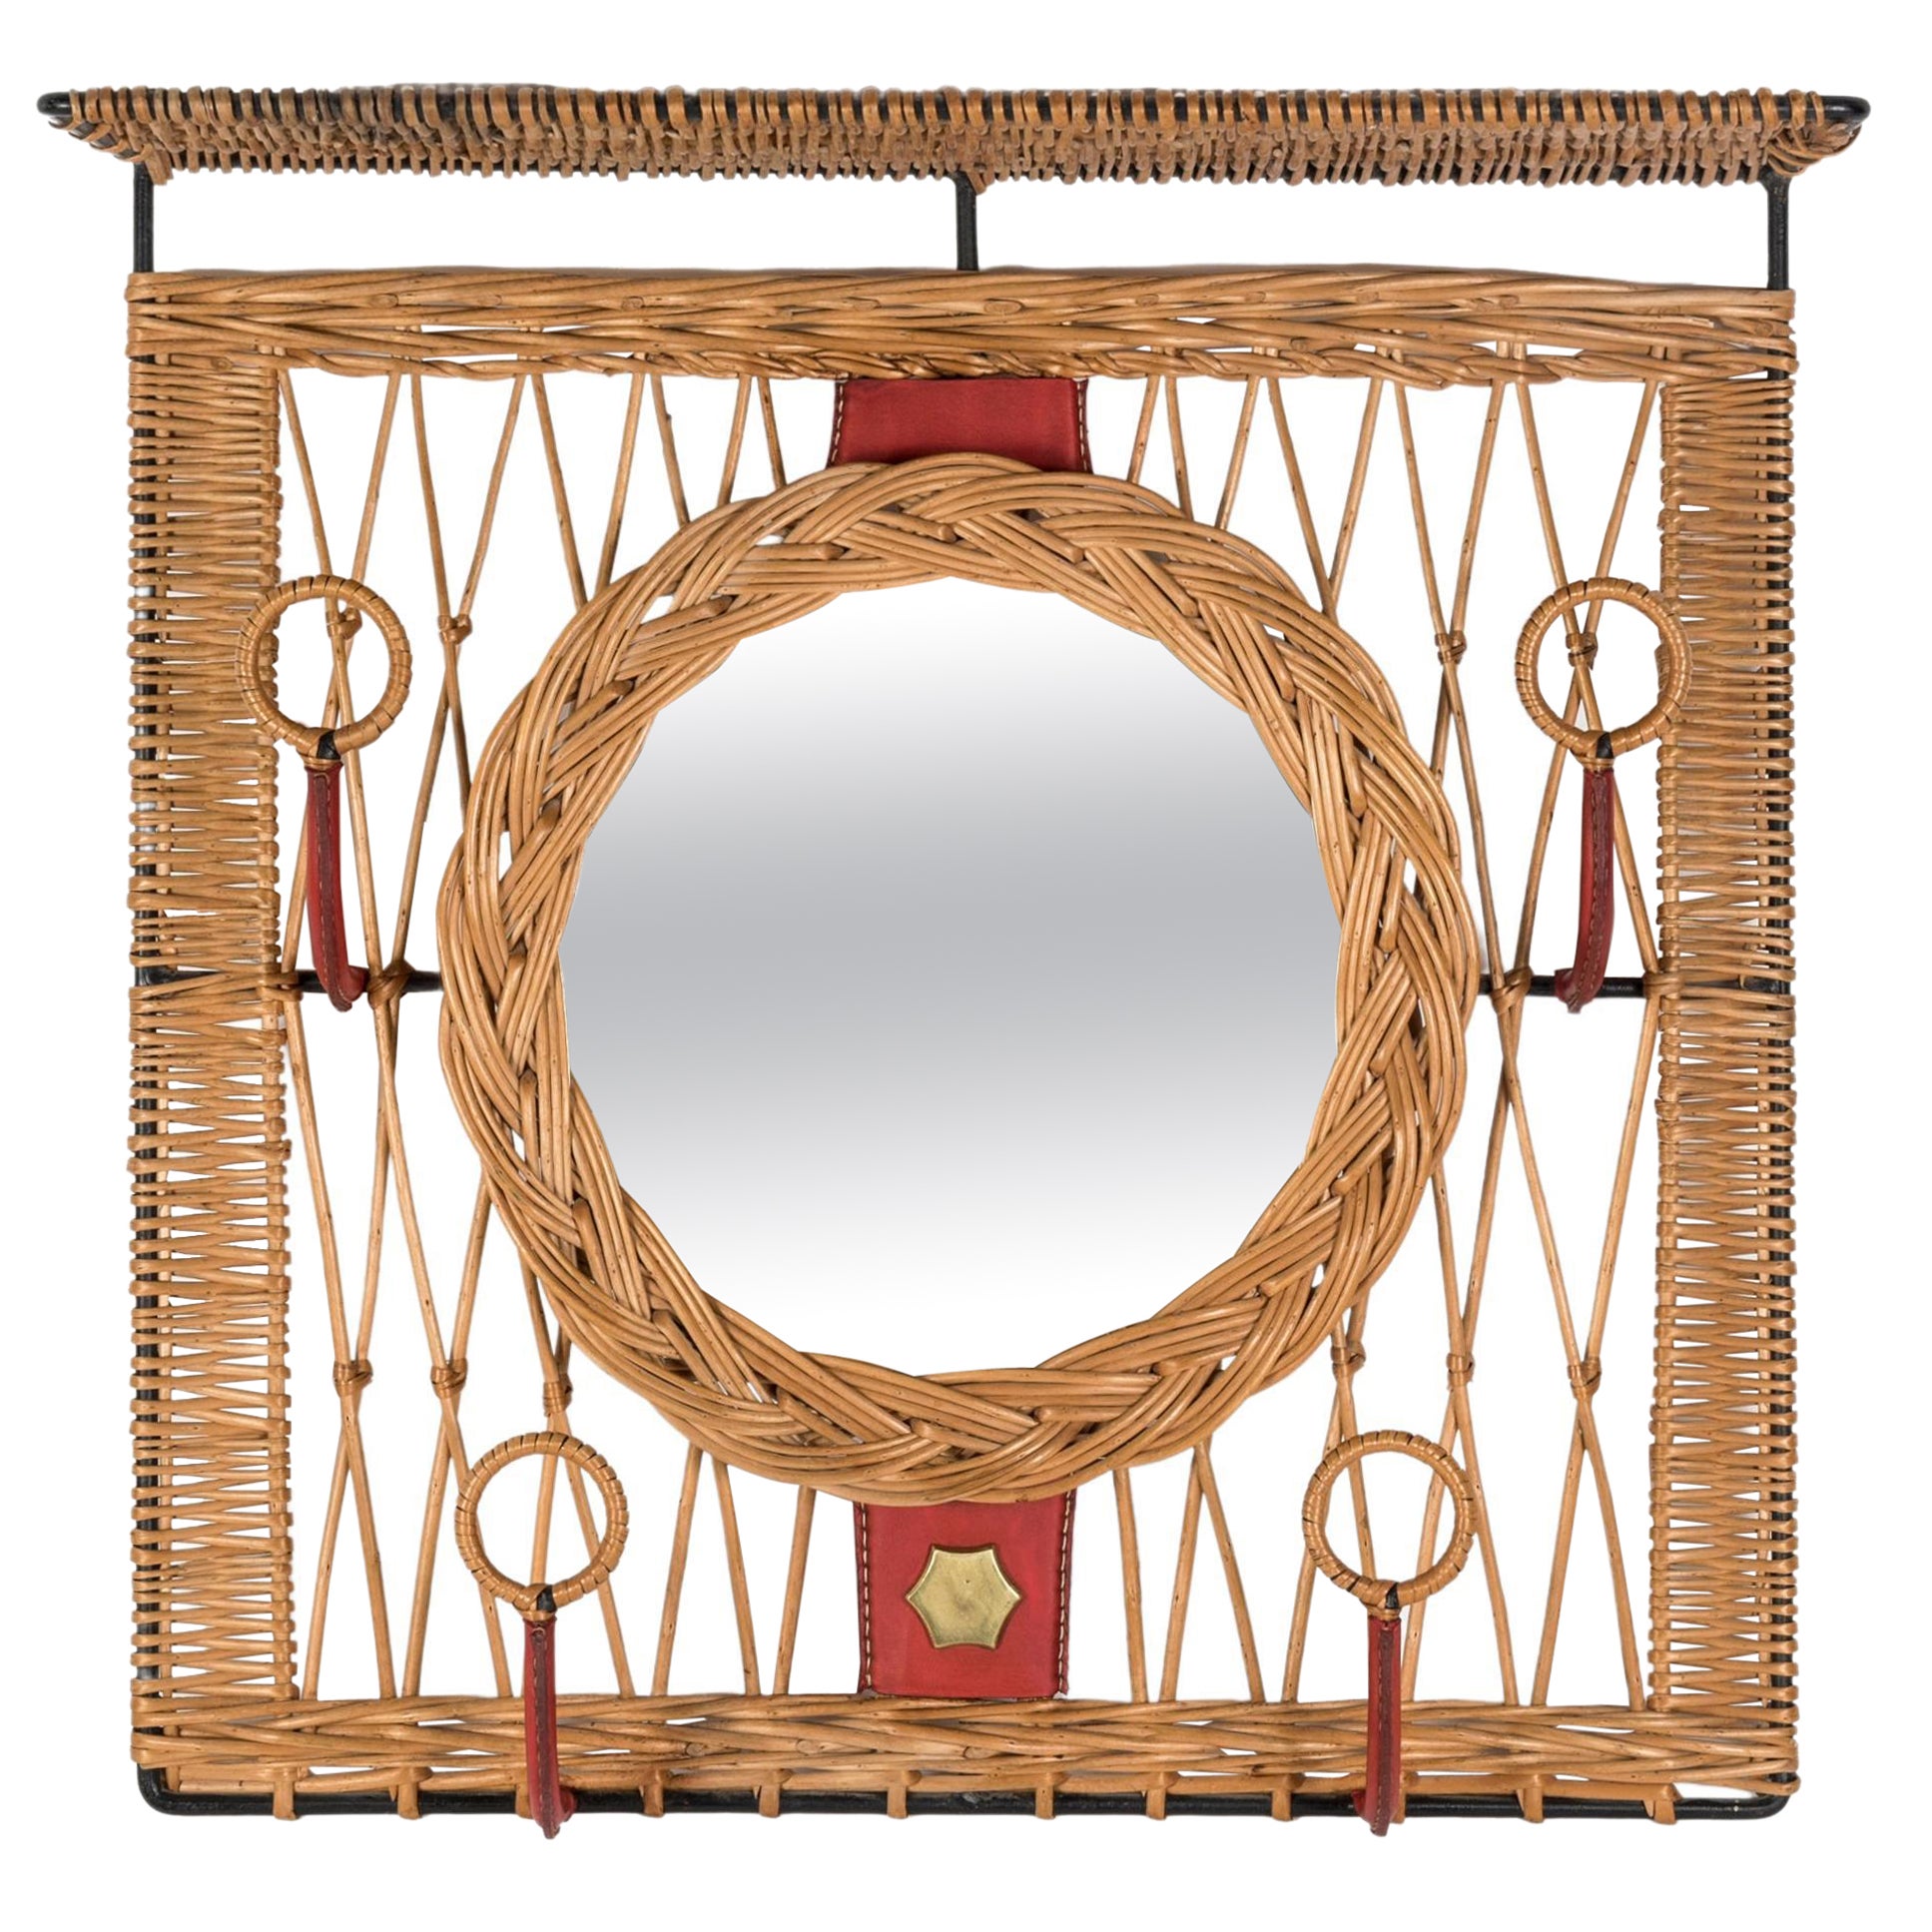 1950's Stitched leather and rattan wall mirror by Jacques Adnet